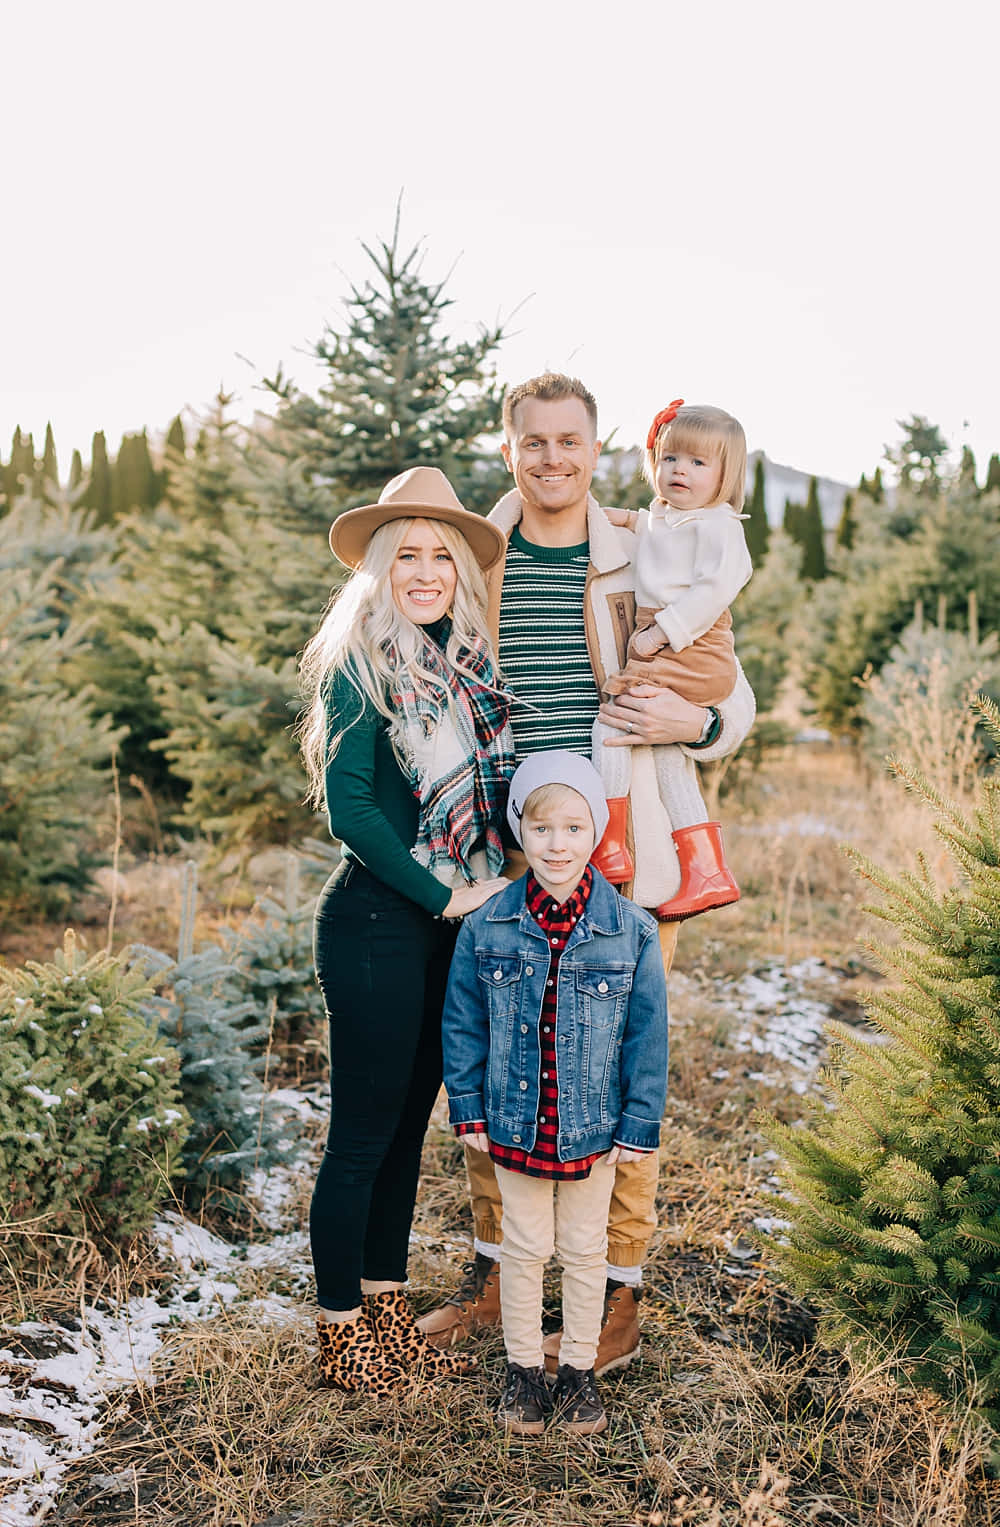 Christmas Tree Farm Family Pictures